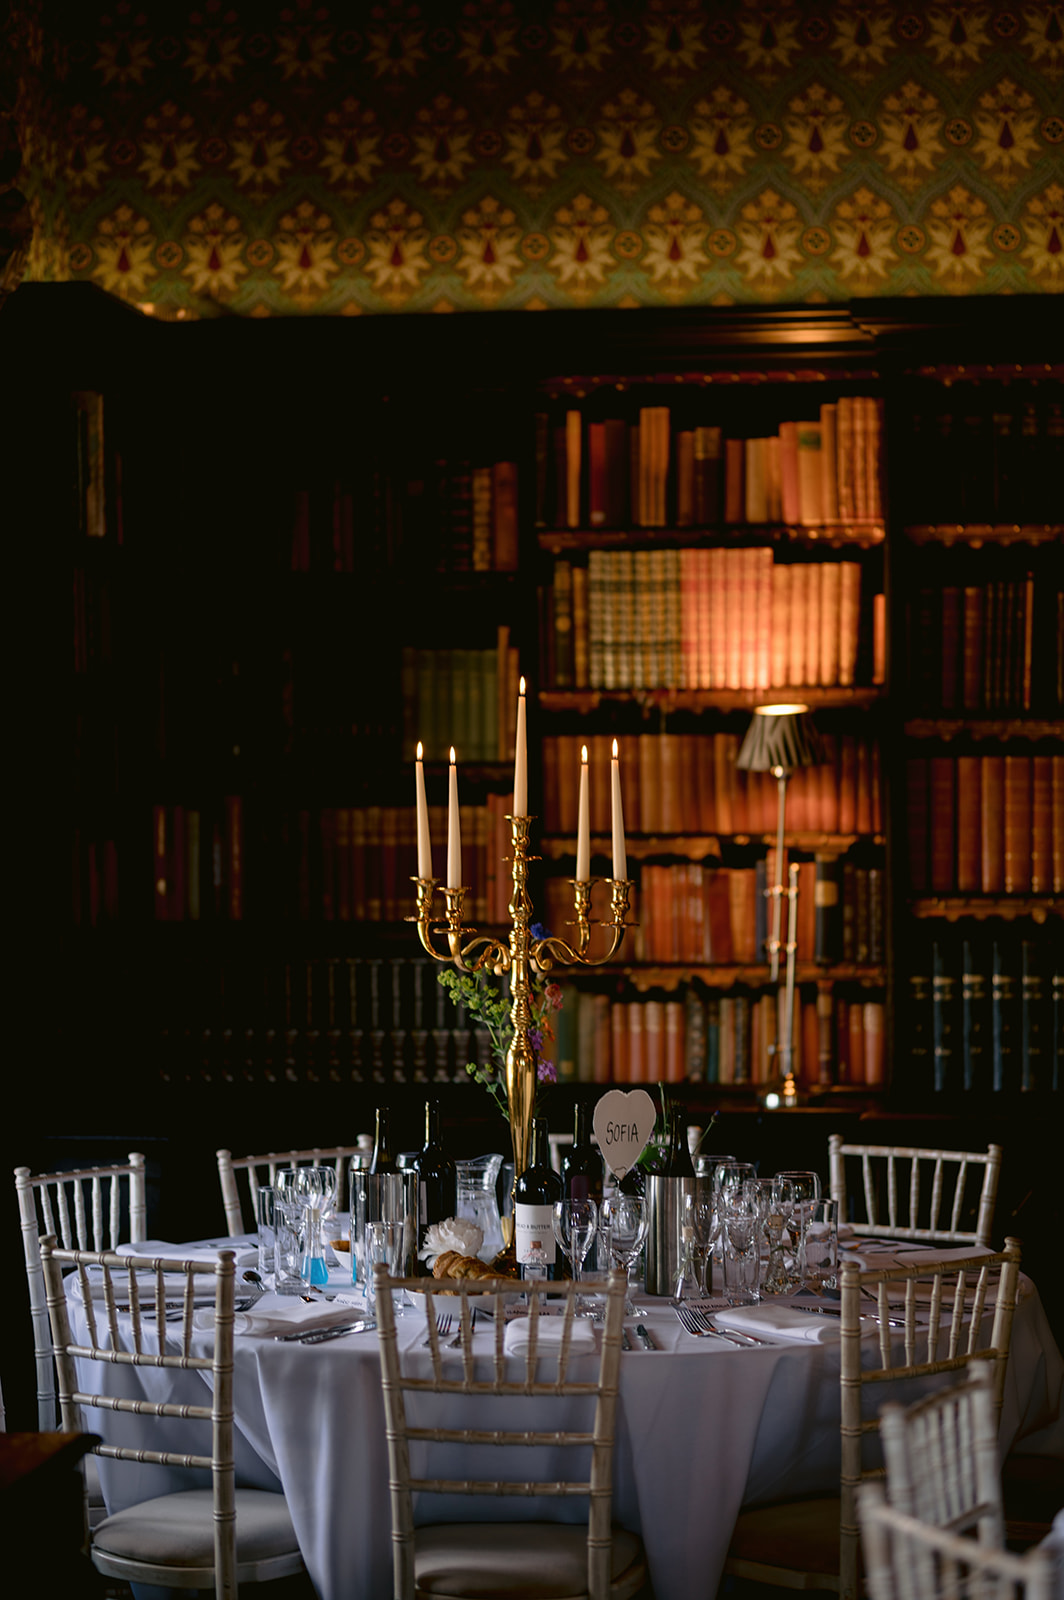 Details of delight: Decorative elements bring a touch of magic to Huntsham Court castle's wedding setting, England